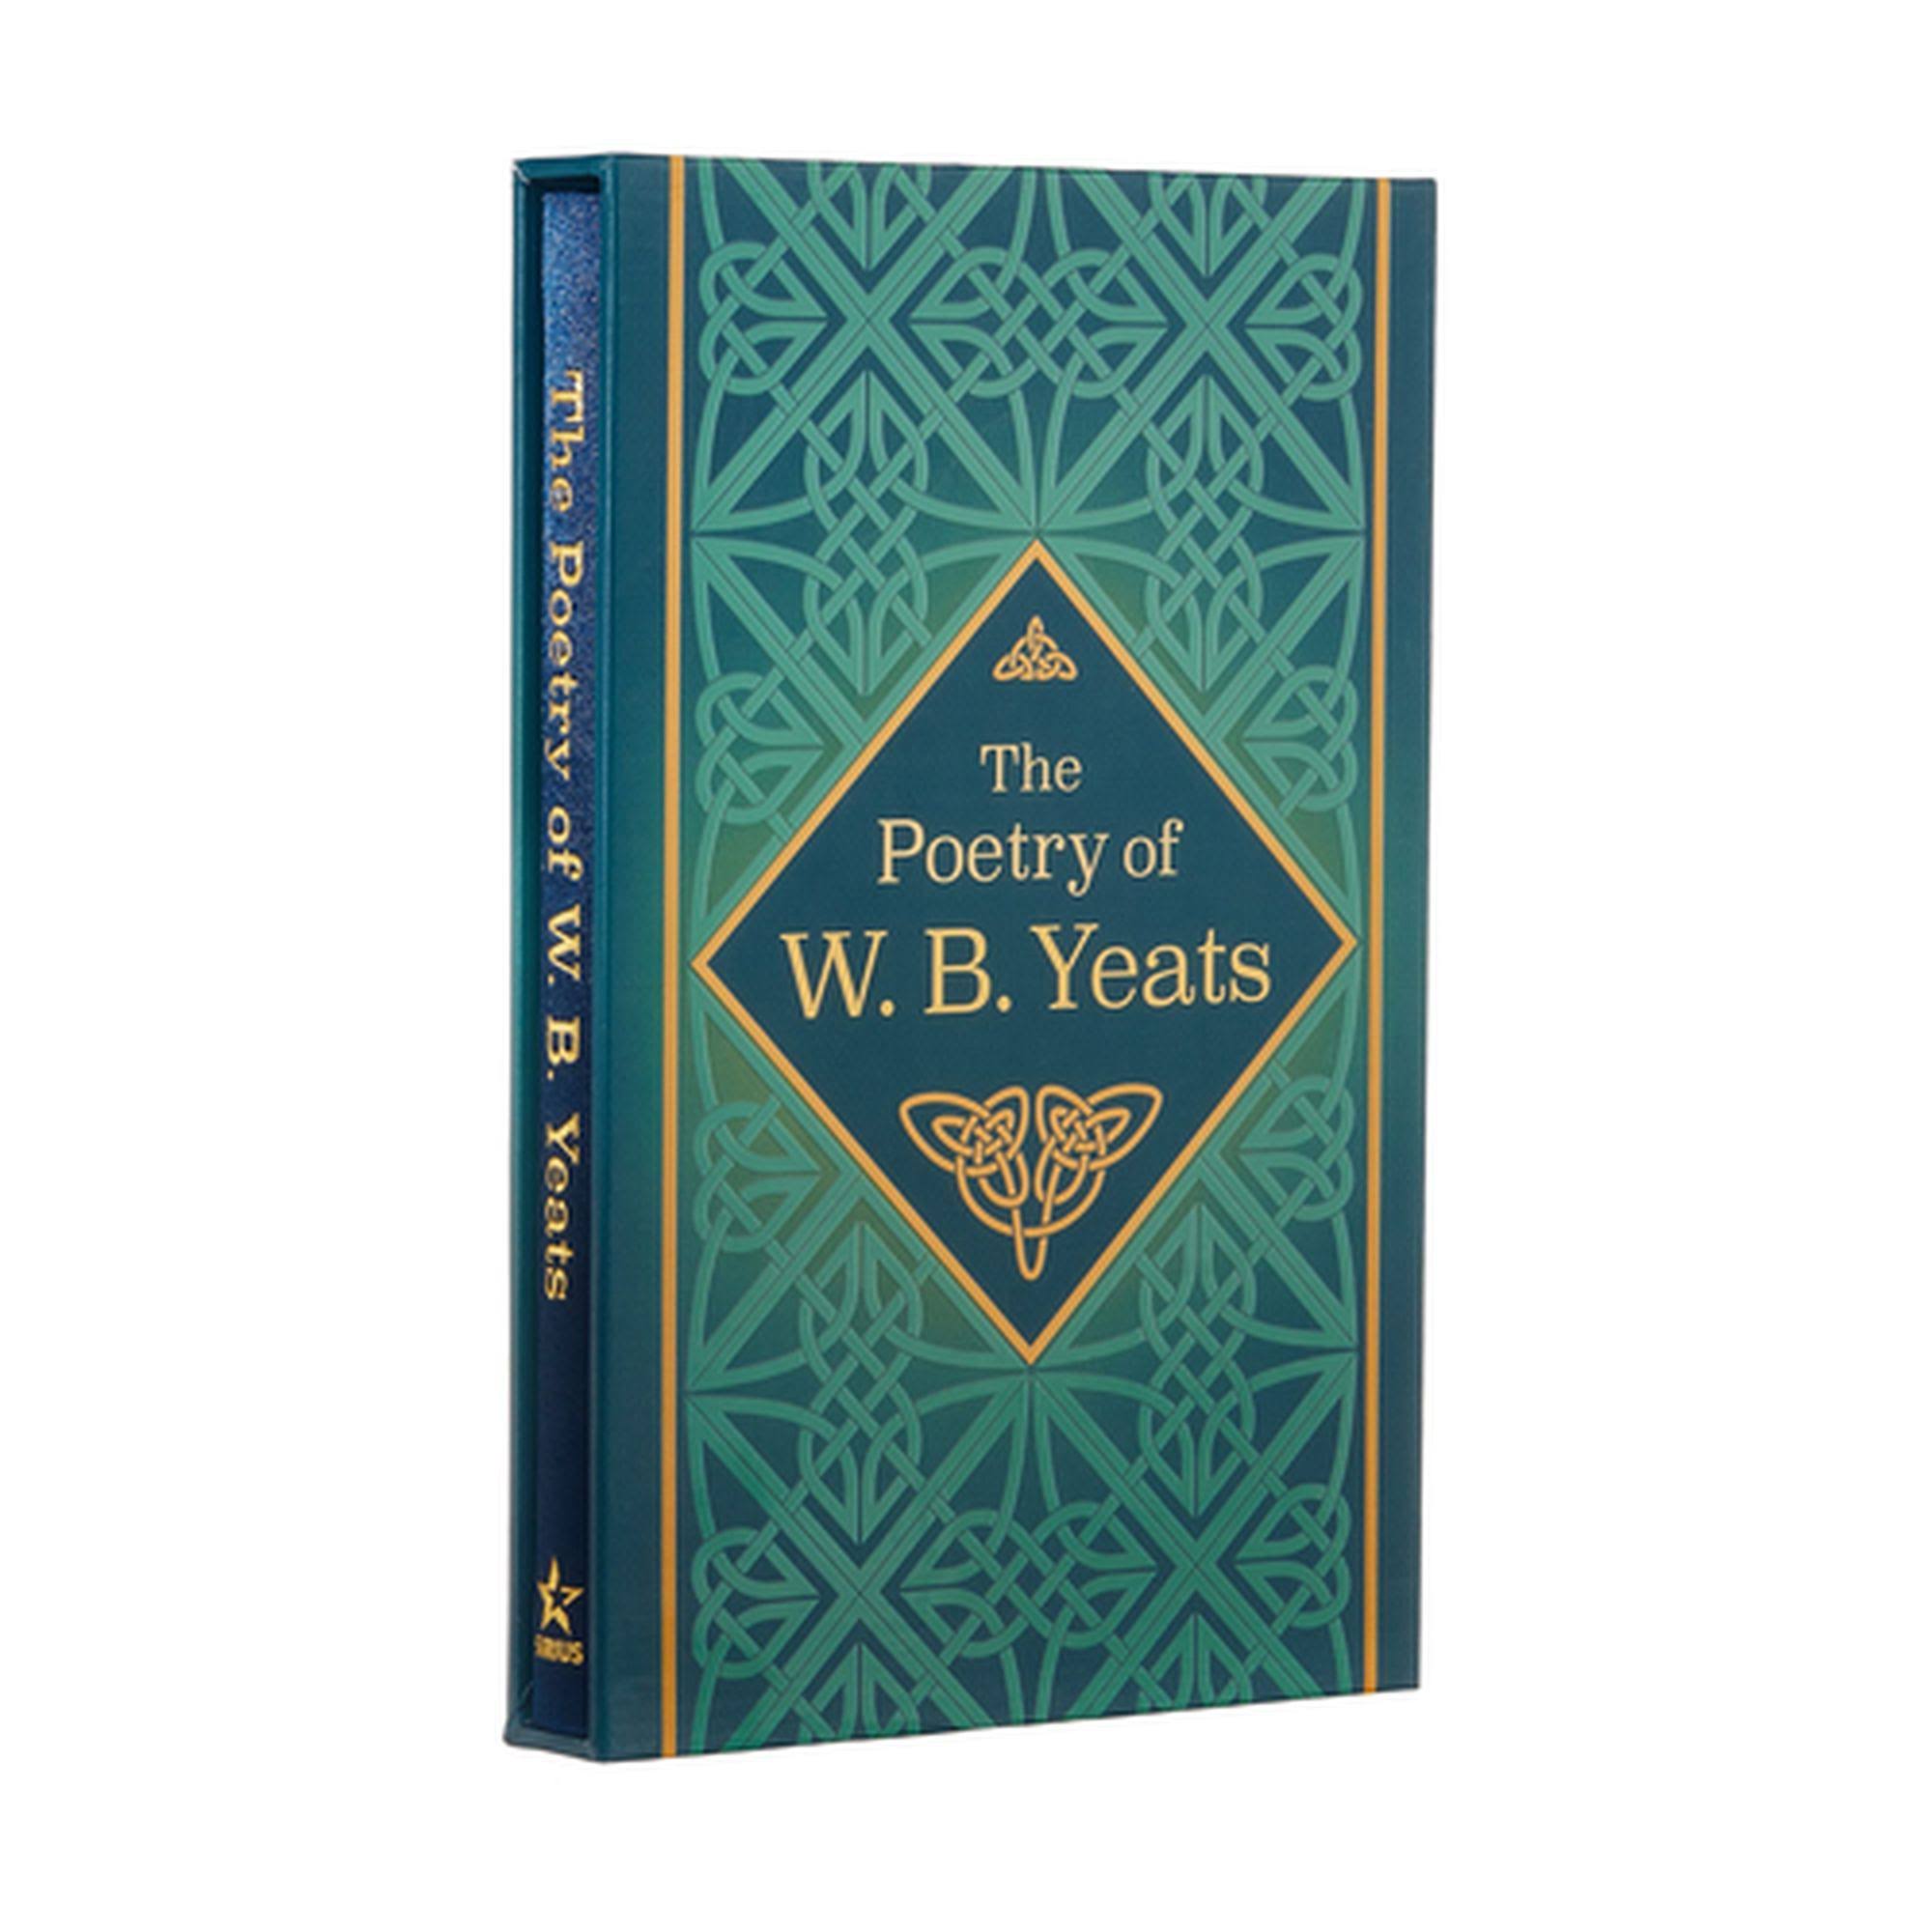 The Poetry of W. B. Yeats: Deluxe Slipcase Edition [Book]